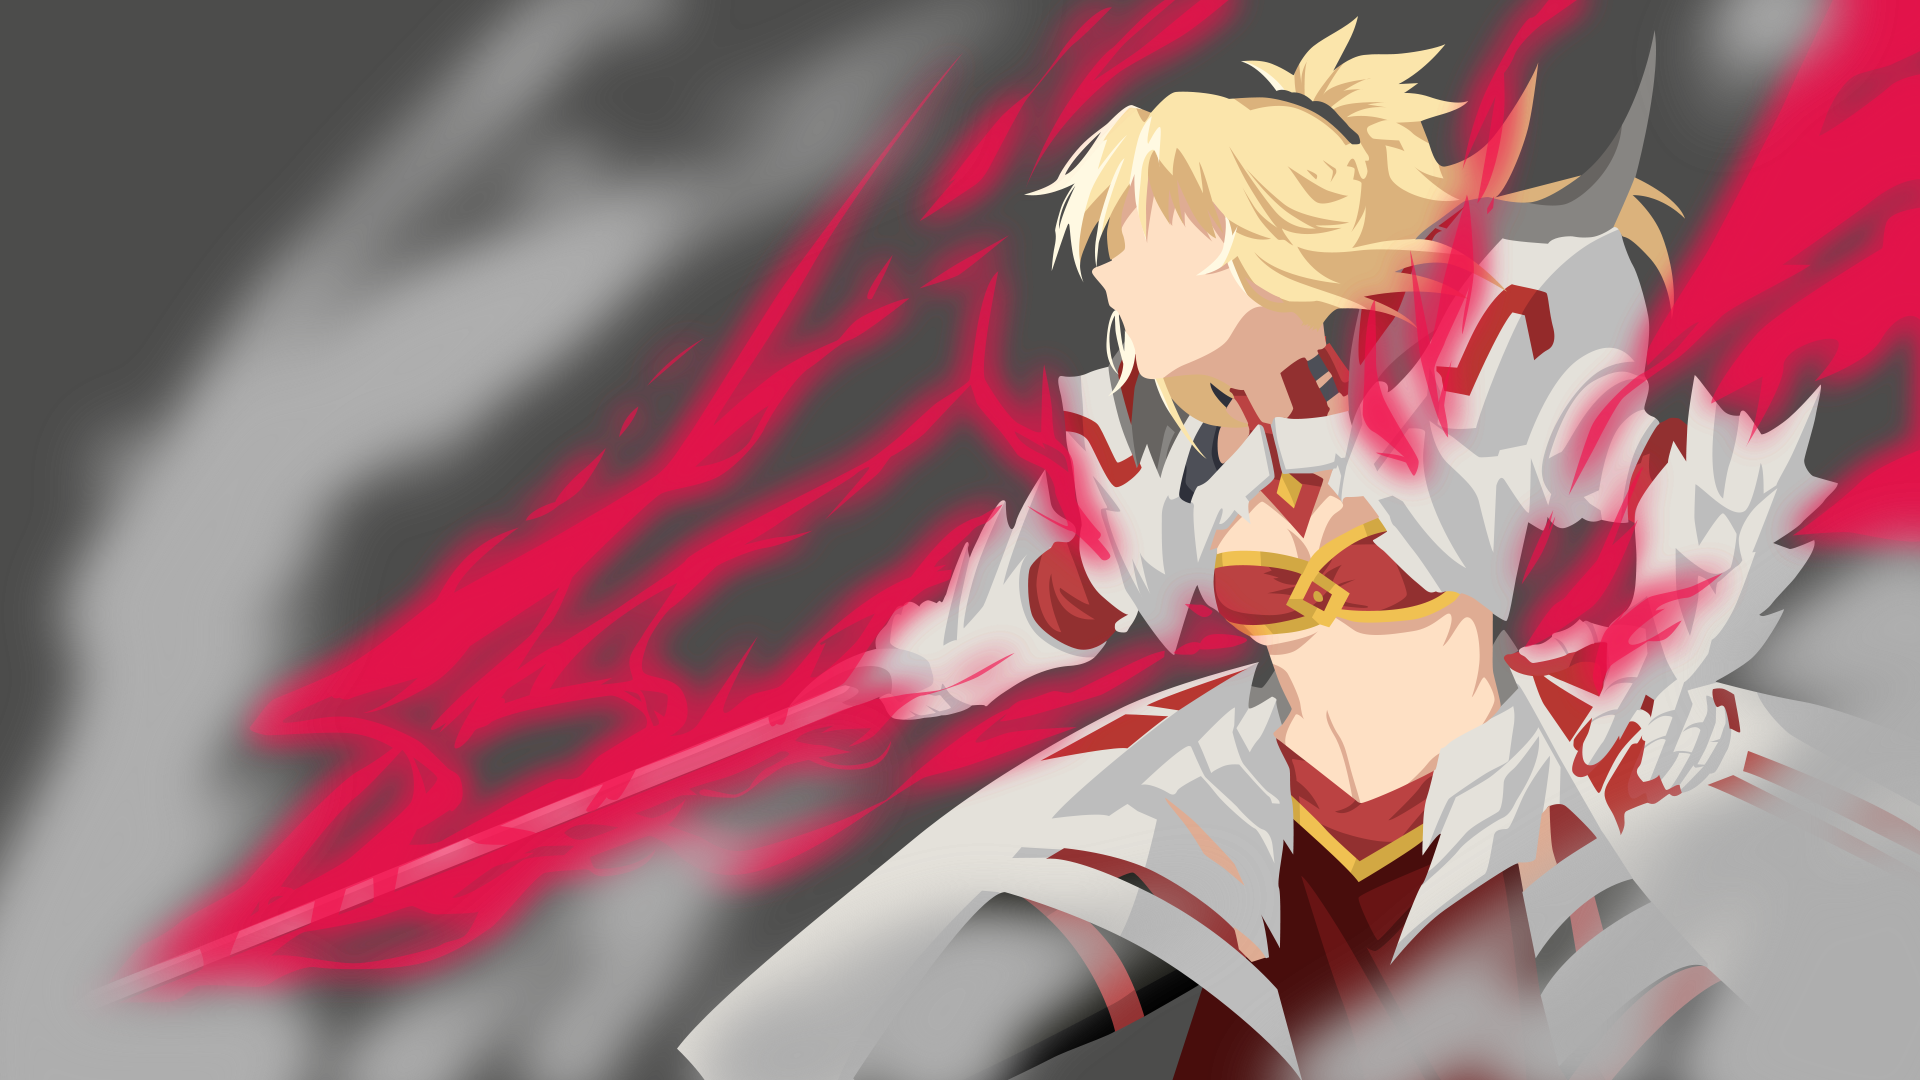 Armor Blonde Fate Series Girl Minimalist Mordred Fate Apocrypha Saber Fate Series Saber Of Red Fate  1920x1080